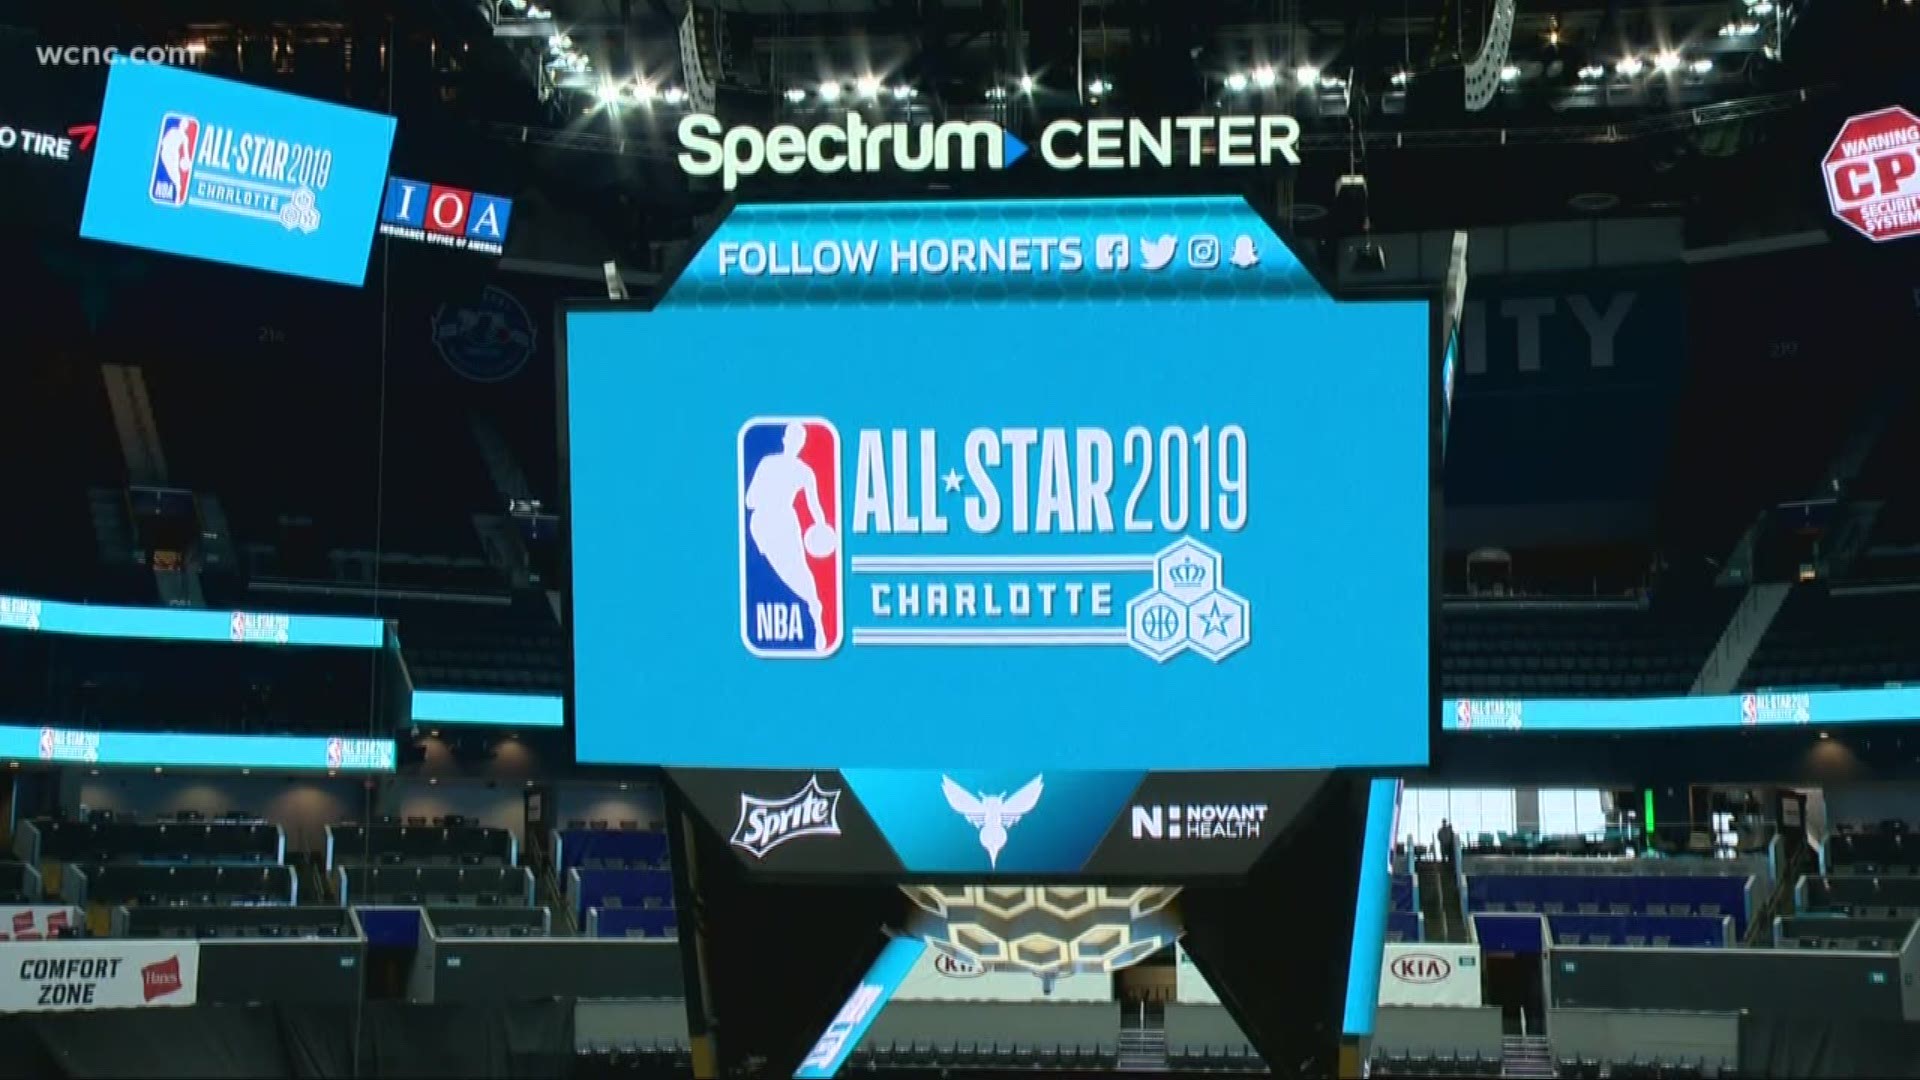 Charlotte city leaders are finalizing their plans for a citywide transformation for the upcoming 2019 NBA All-Star Game weekend.